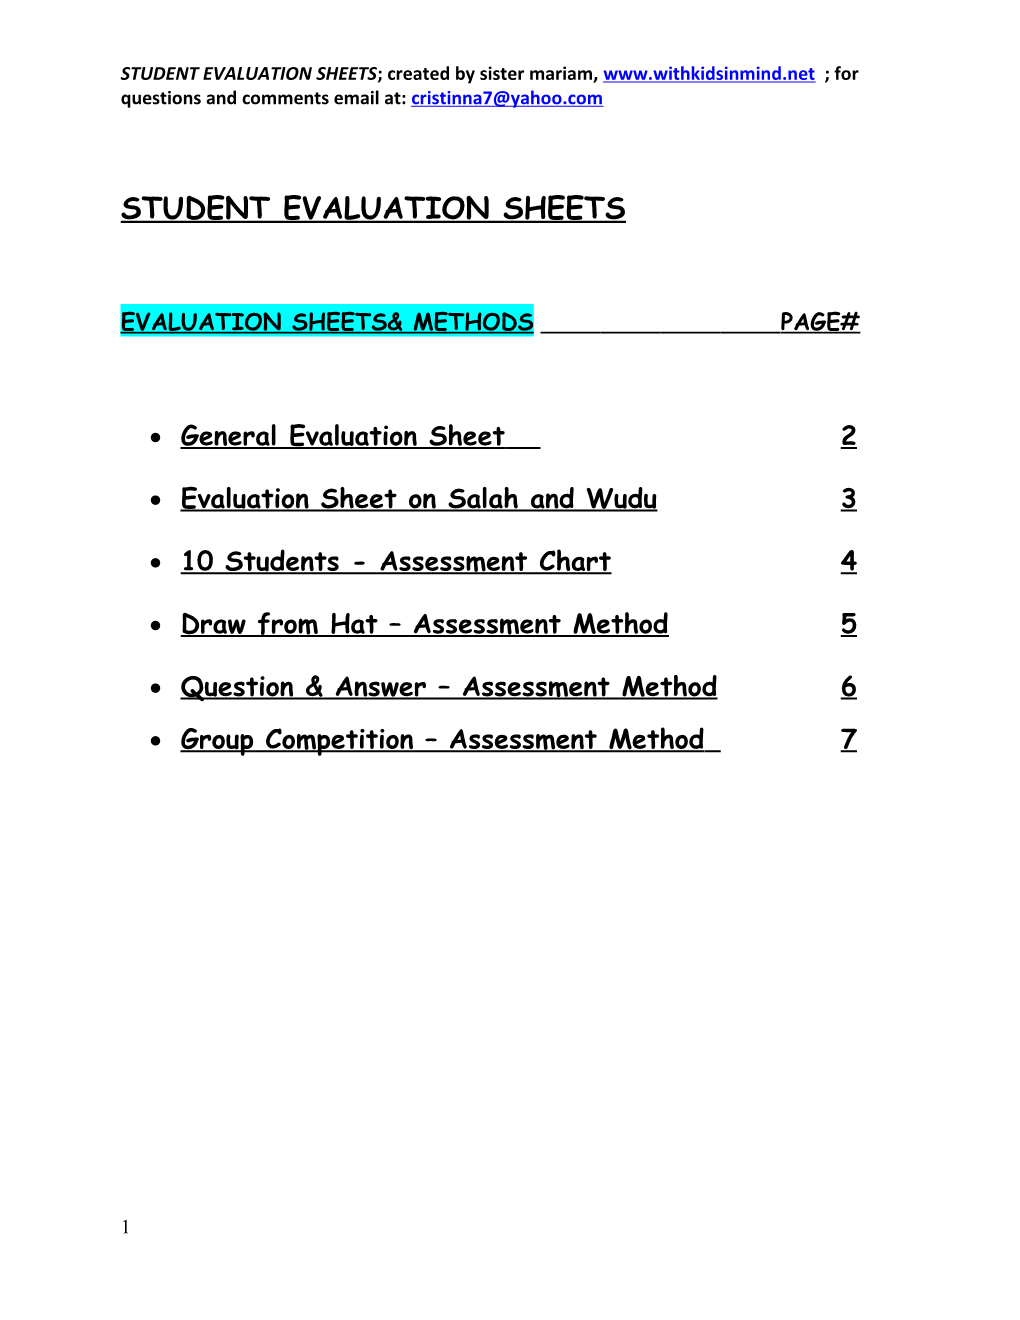 STUDENT EVALUATION SHEETS;Created by Sister Mariam, ; for Questions and Comments Email At